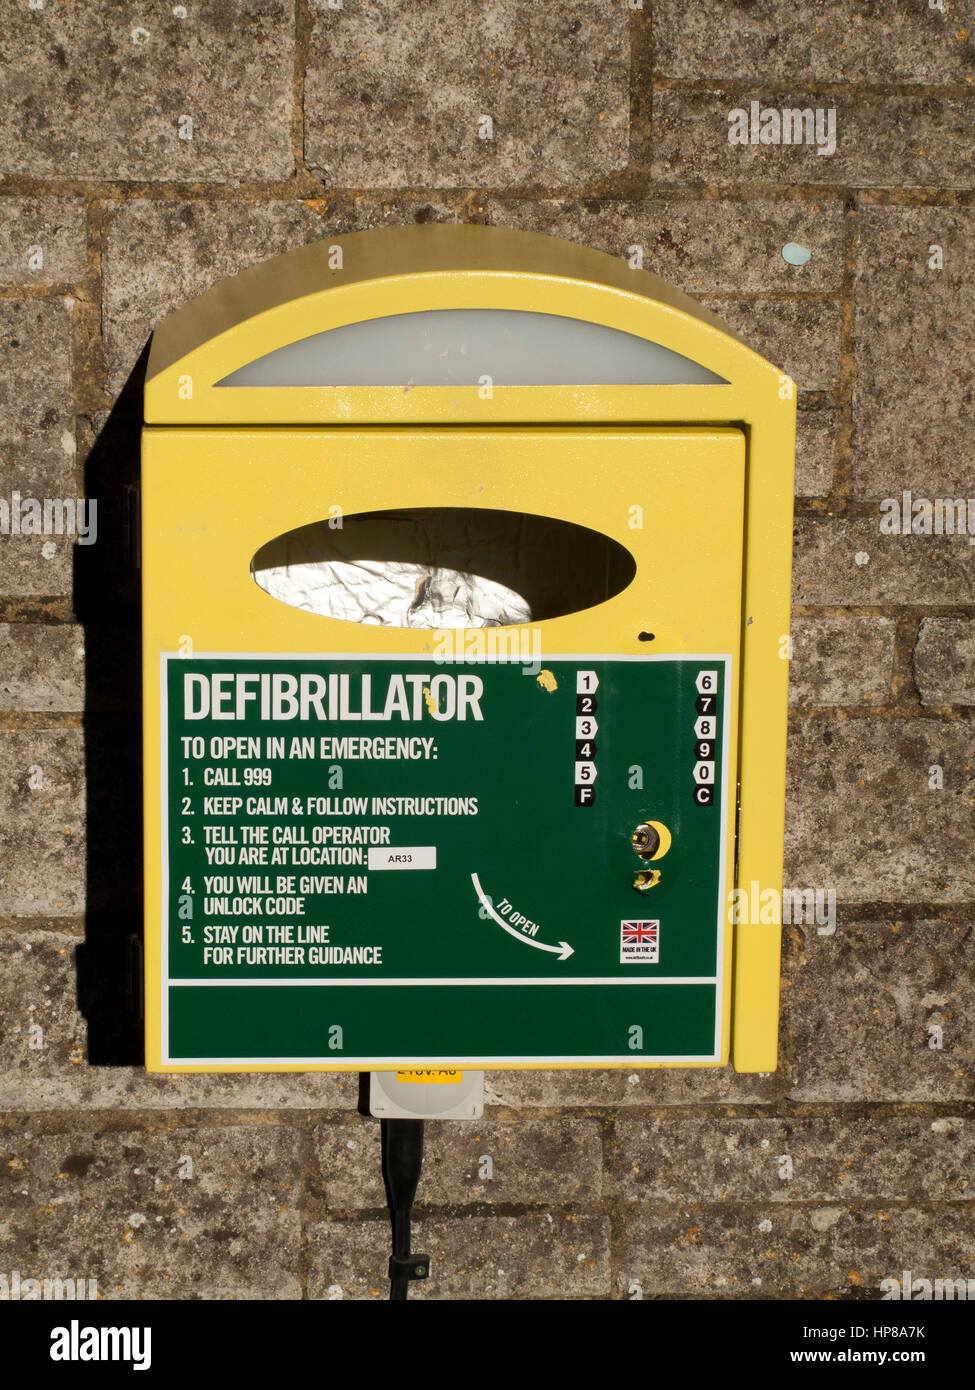 Medical defibrillator mounted on stone wall for use by the general public with instructions Stock Photo